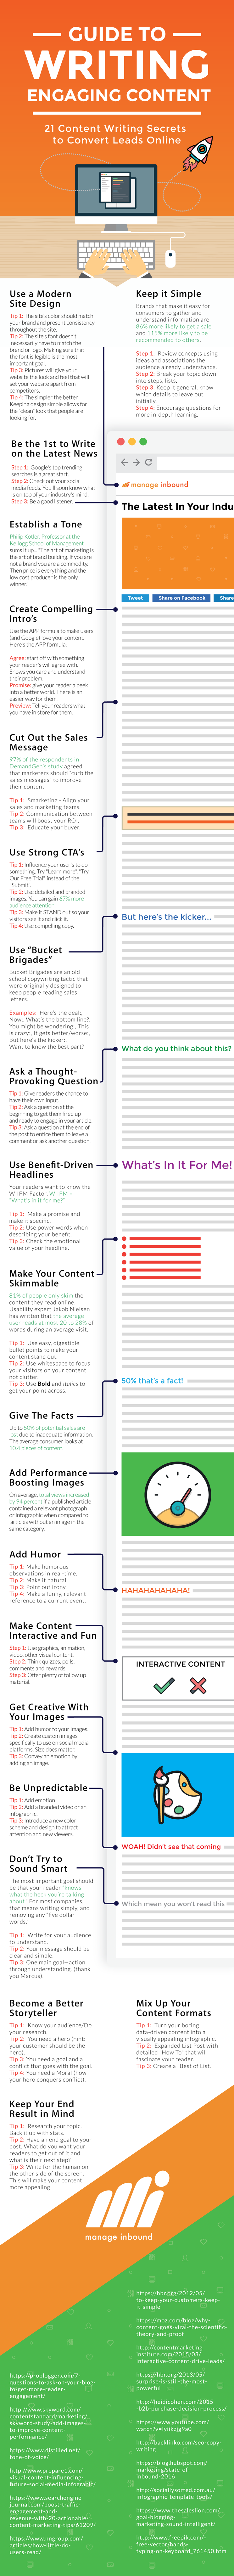 21-ways-content-appealing-infographic.png